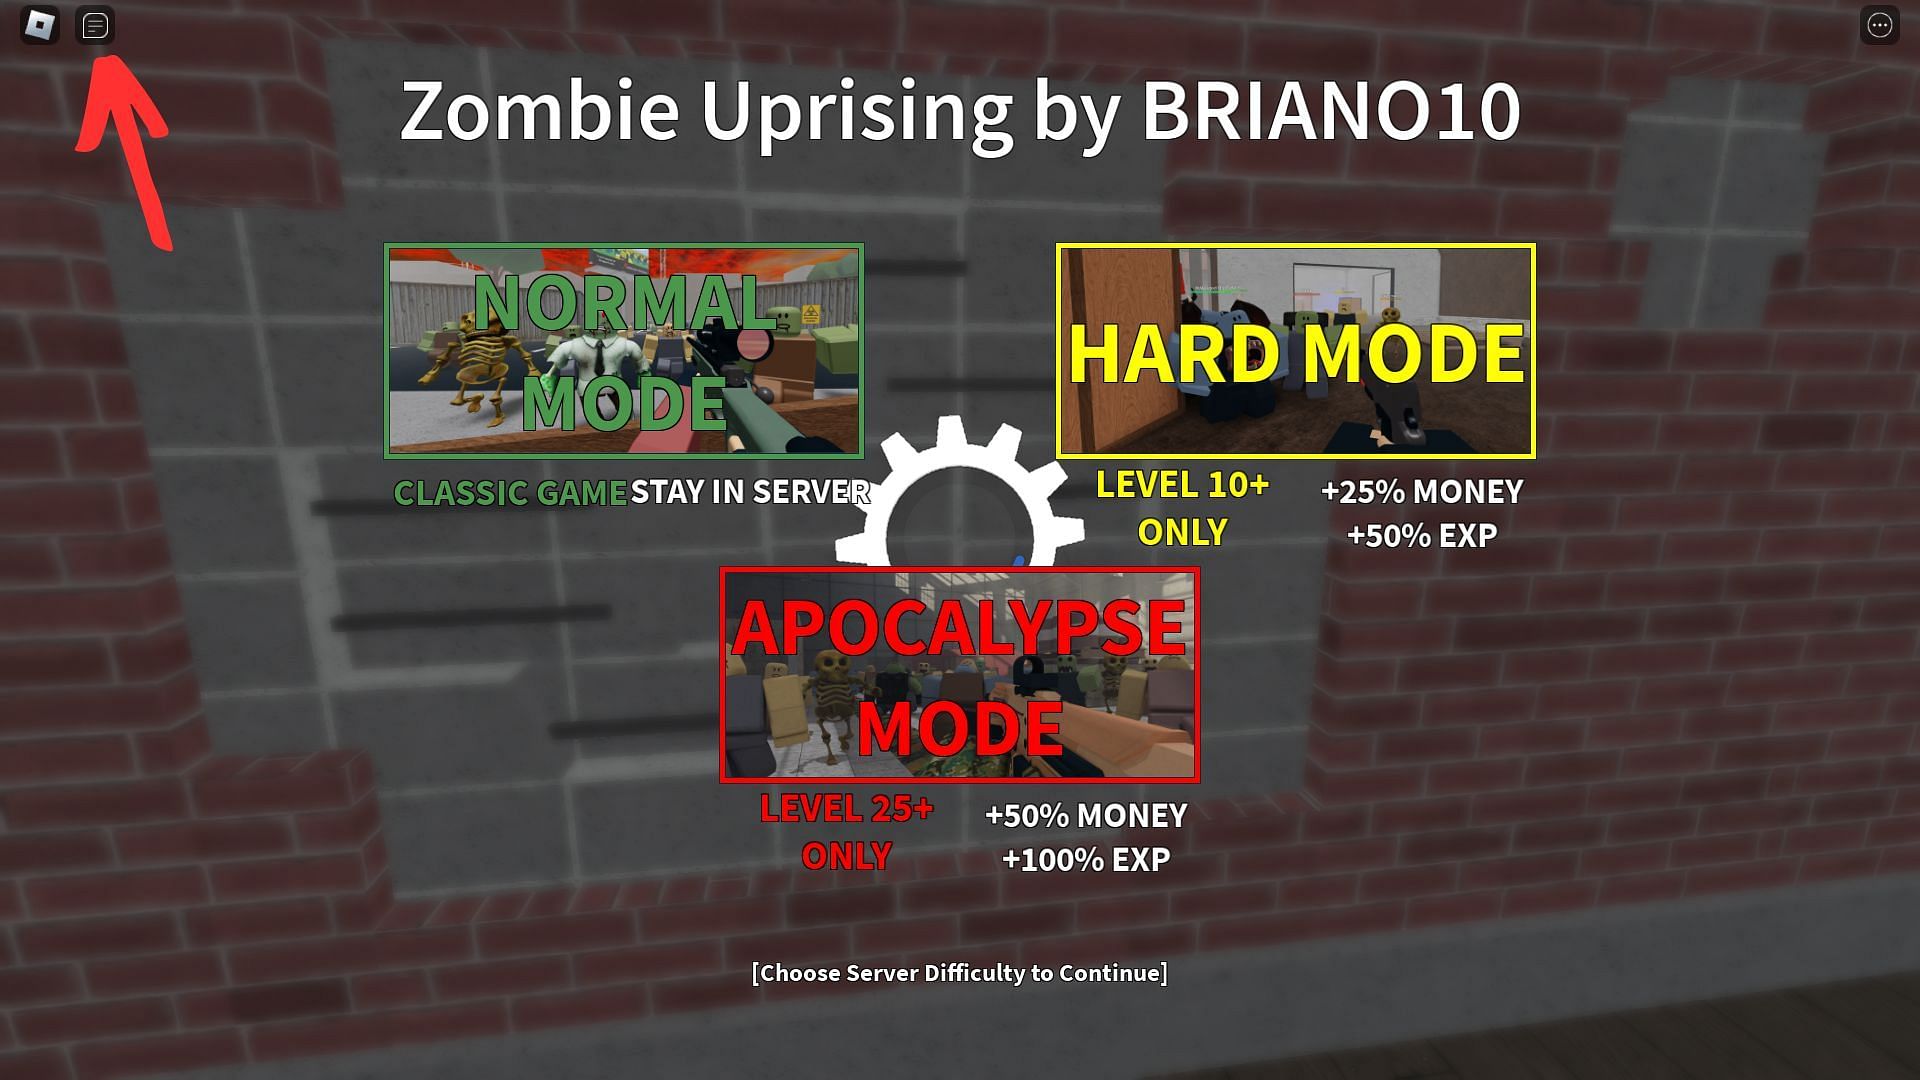 How to redeem codes for Zombie Uprising (Image via Roblox and Sportskeeda)